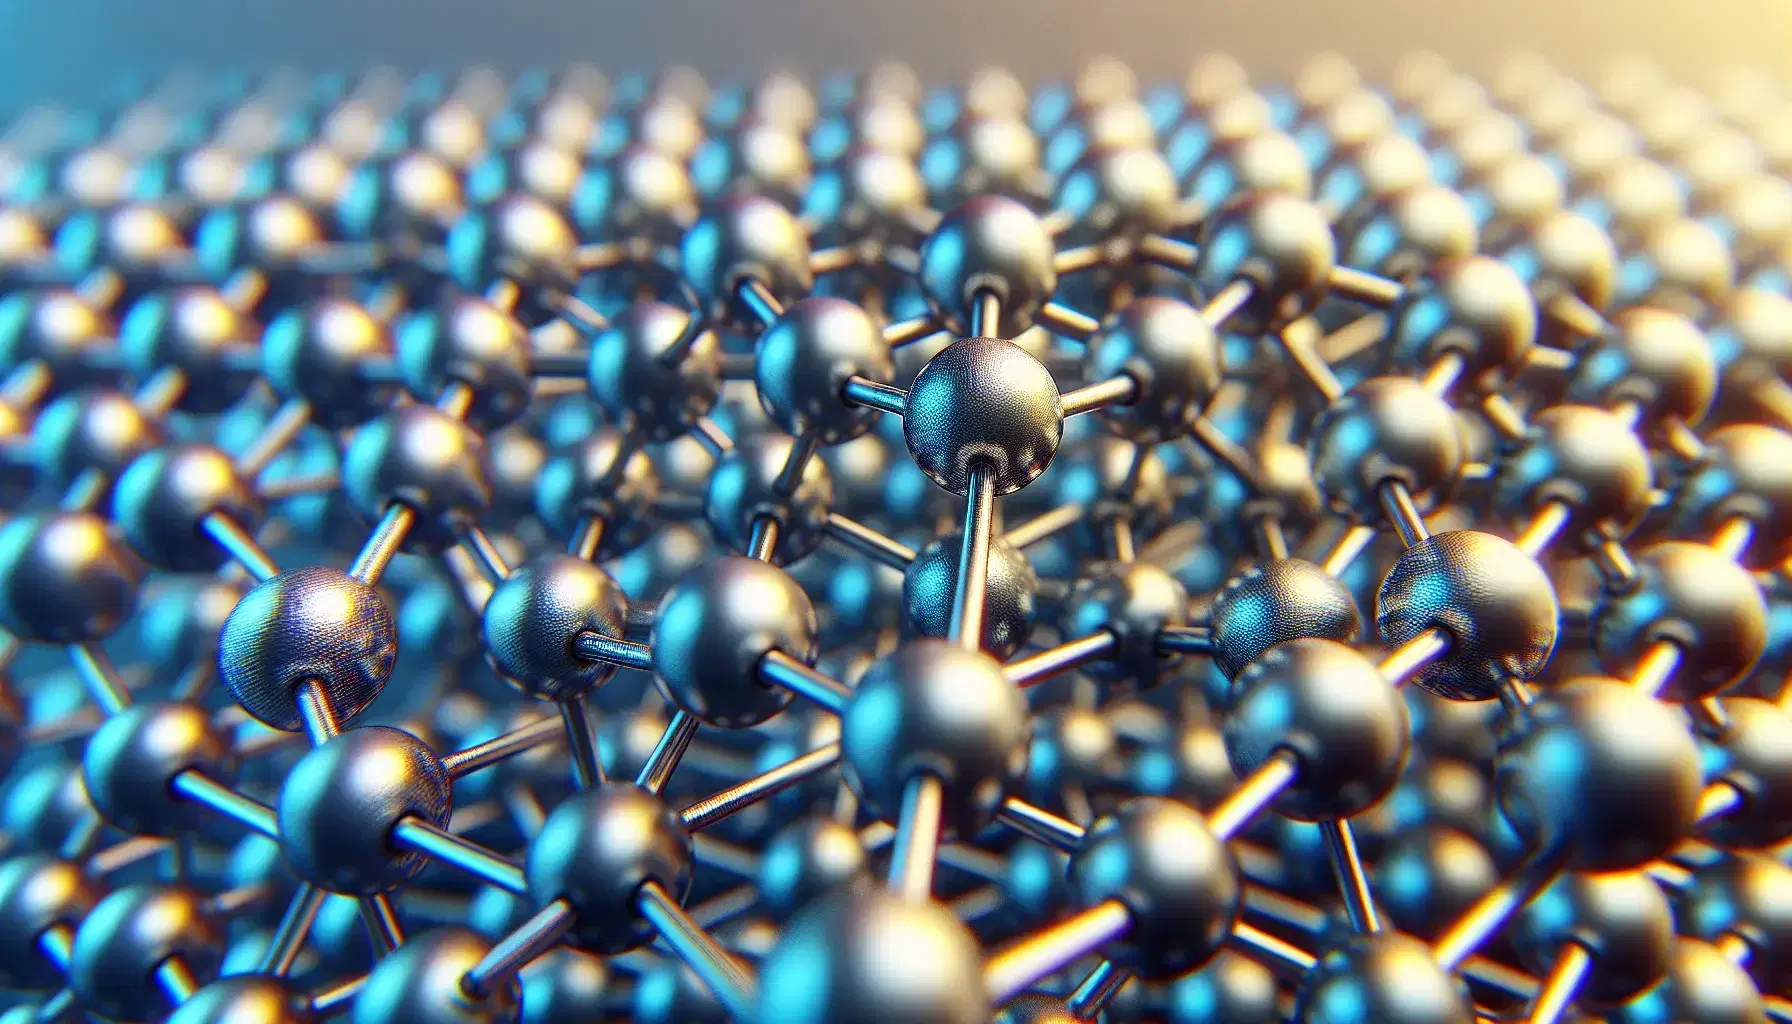 Three-dimensional crystalline structure with silver, gold and blue colored atoms, joined by metallic gray bonds on a blue-white gradient background.